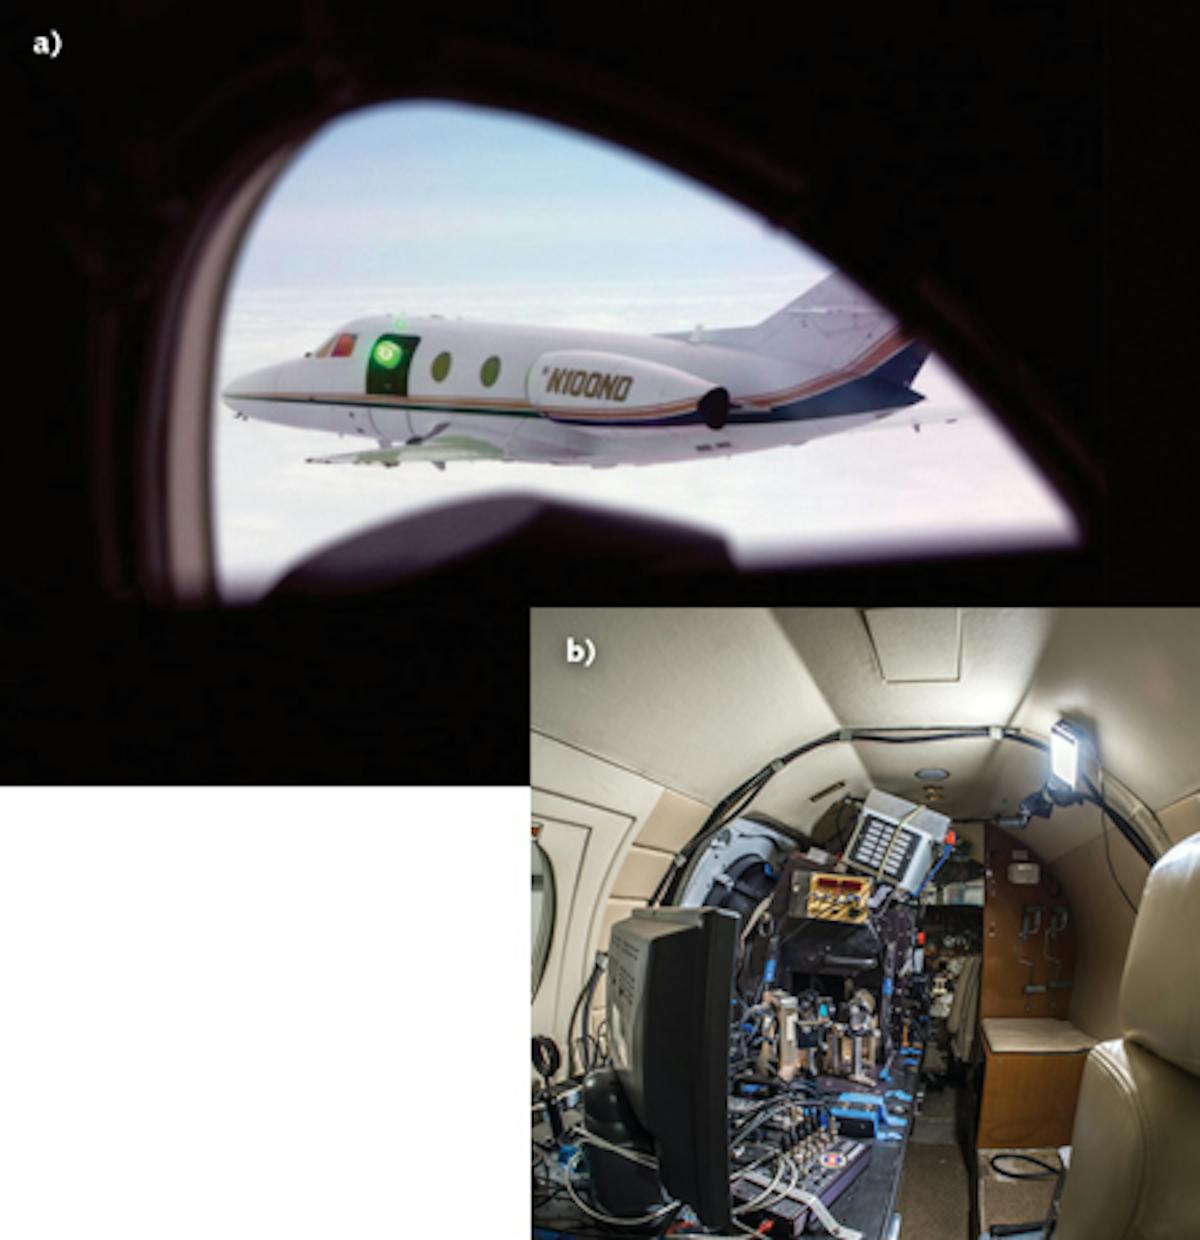 FIGURE 1. The turret of a laboratory aircraft is illuminated (a) by the diverging laser of a source aircraft from which it is viewed; optical aberrations are observed and measured inside the laboratory aircraft (b).